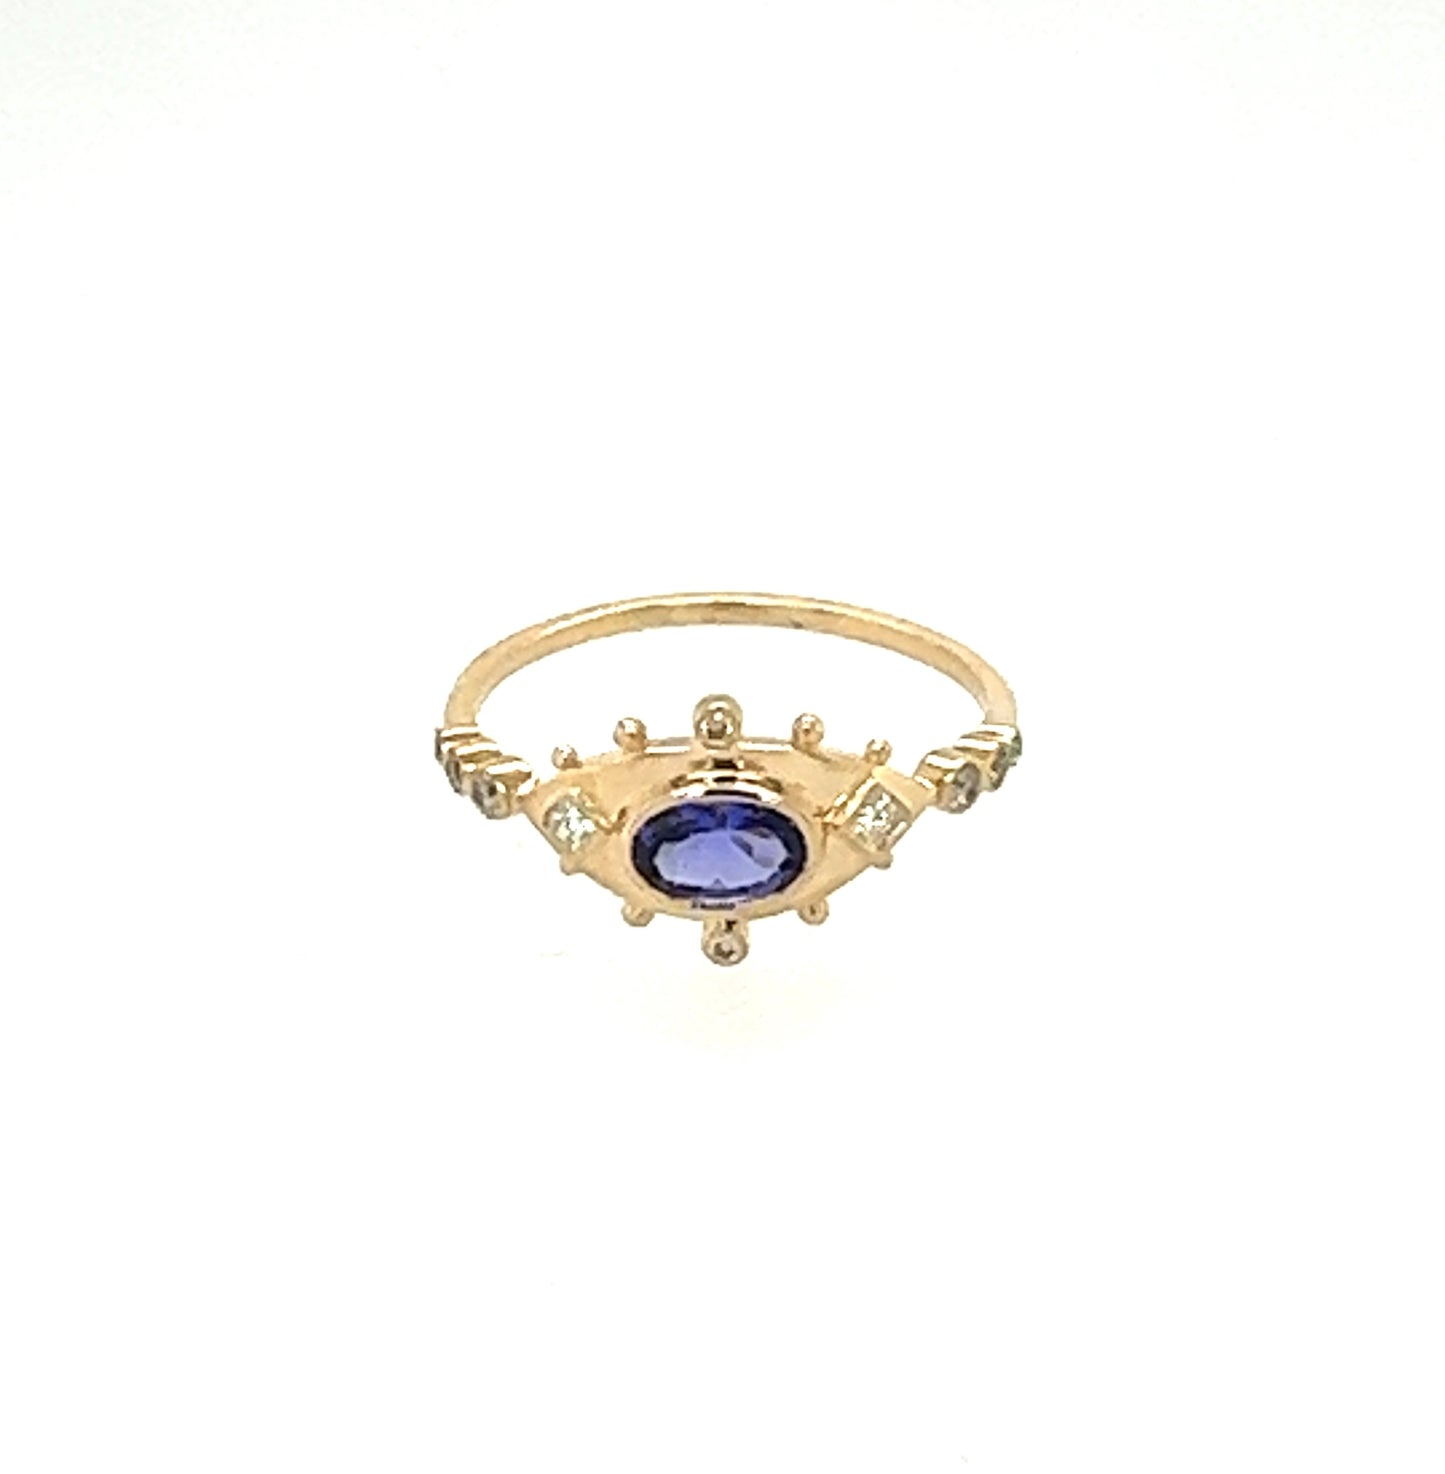 Celine Daoust Tanzanite and Diamond Eye Ring